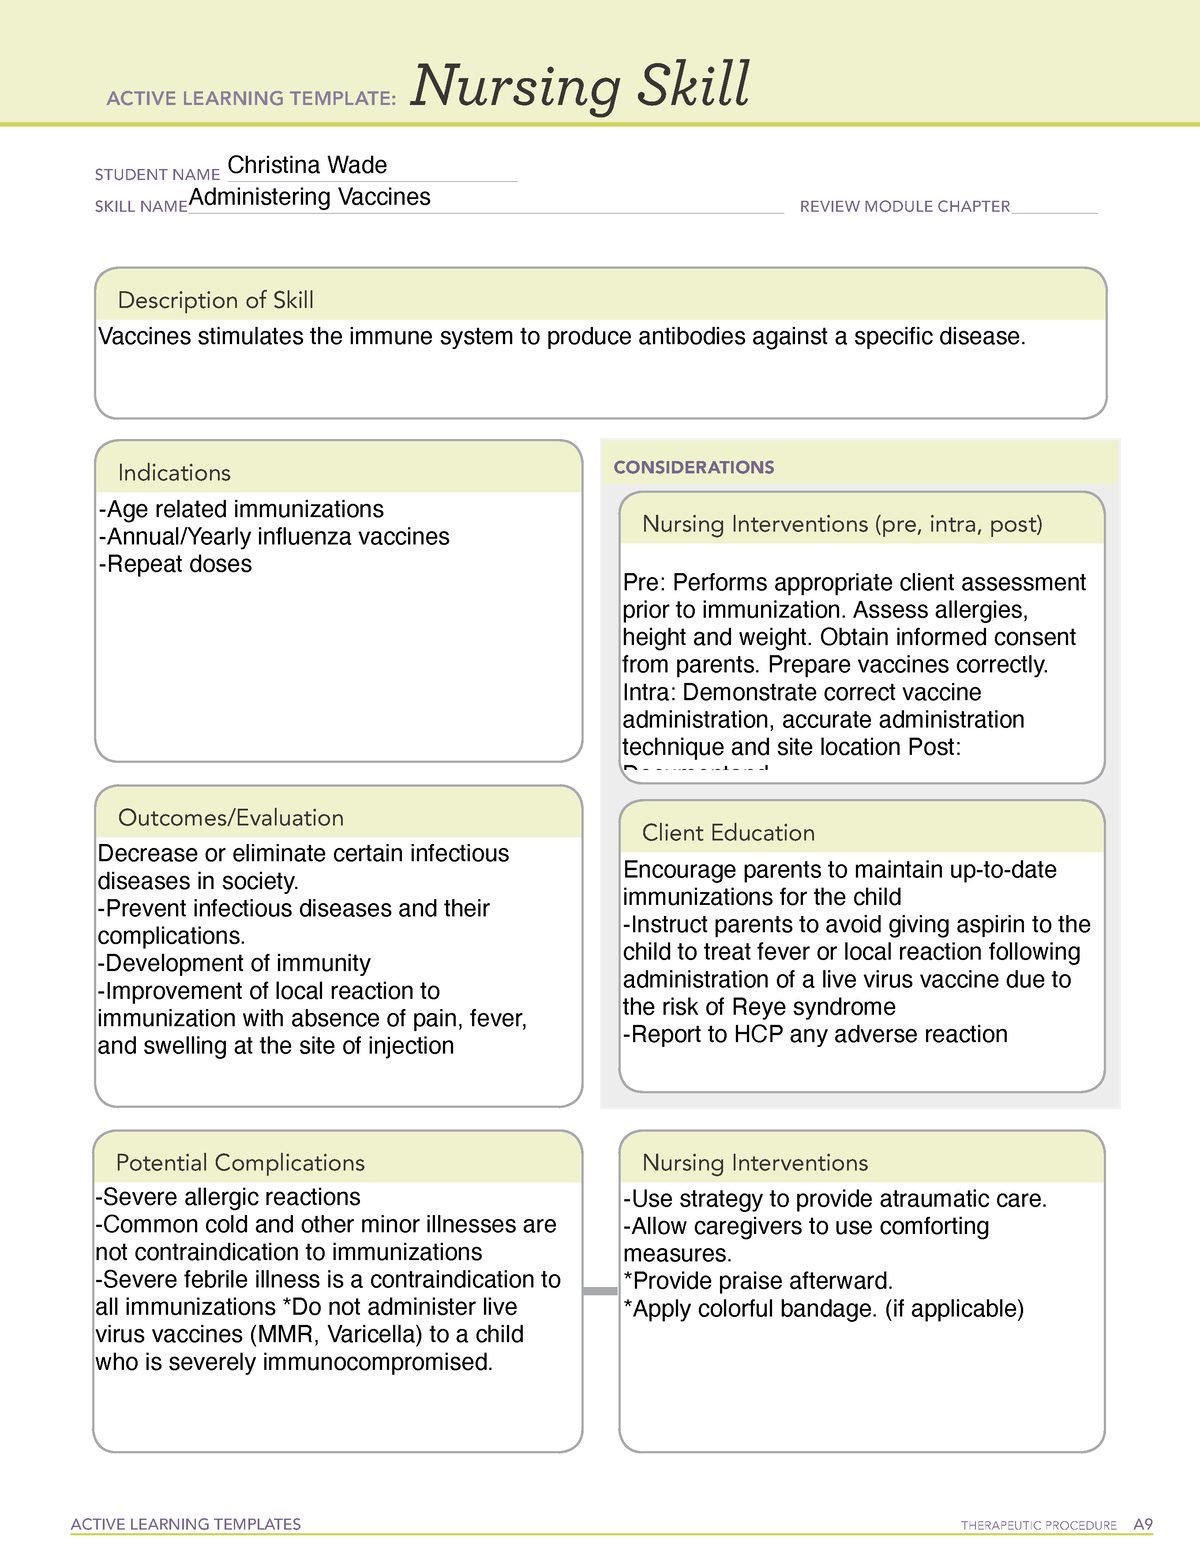 Active Learning Template Nursing Skill Vaccine - ACTIVE LEARNING ...